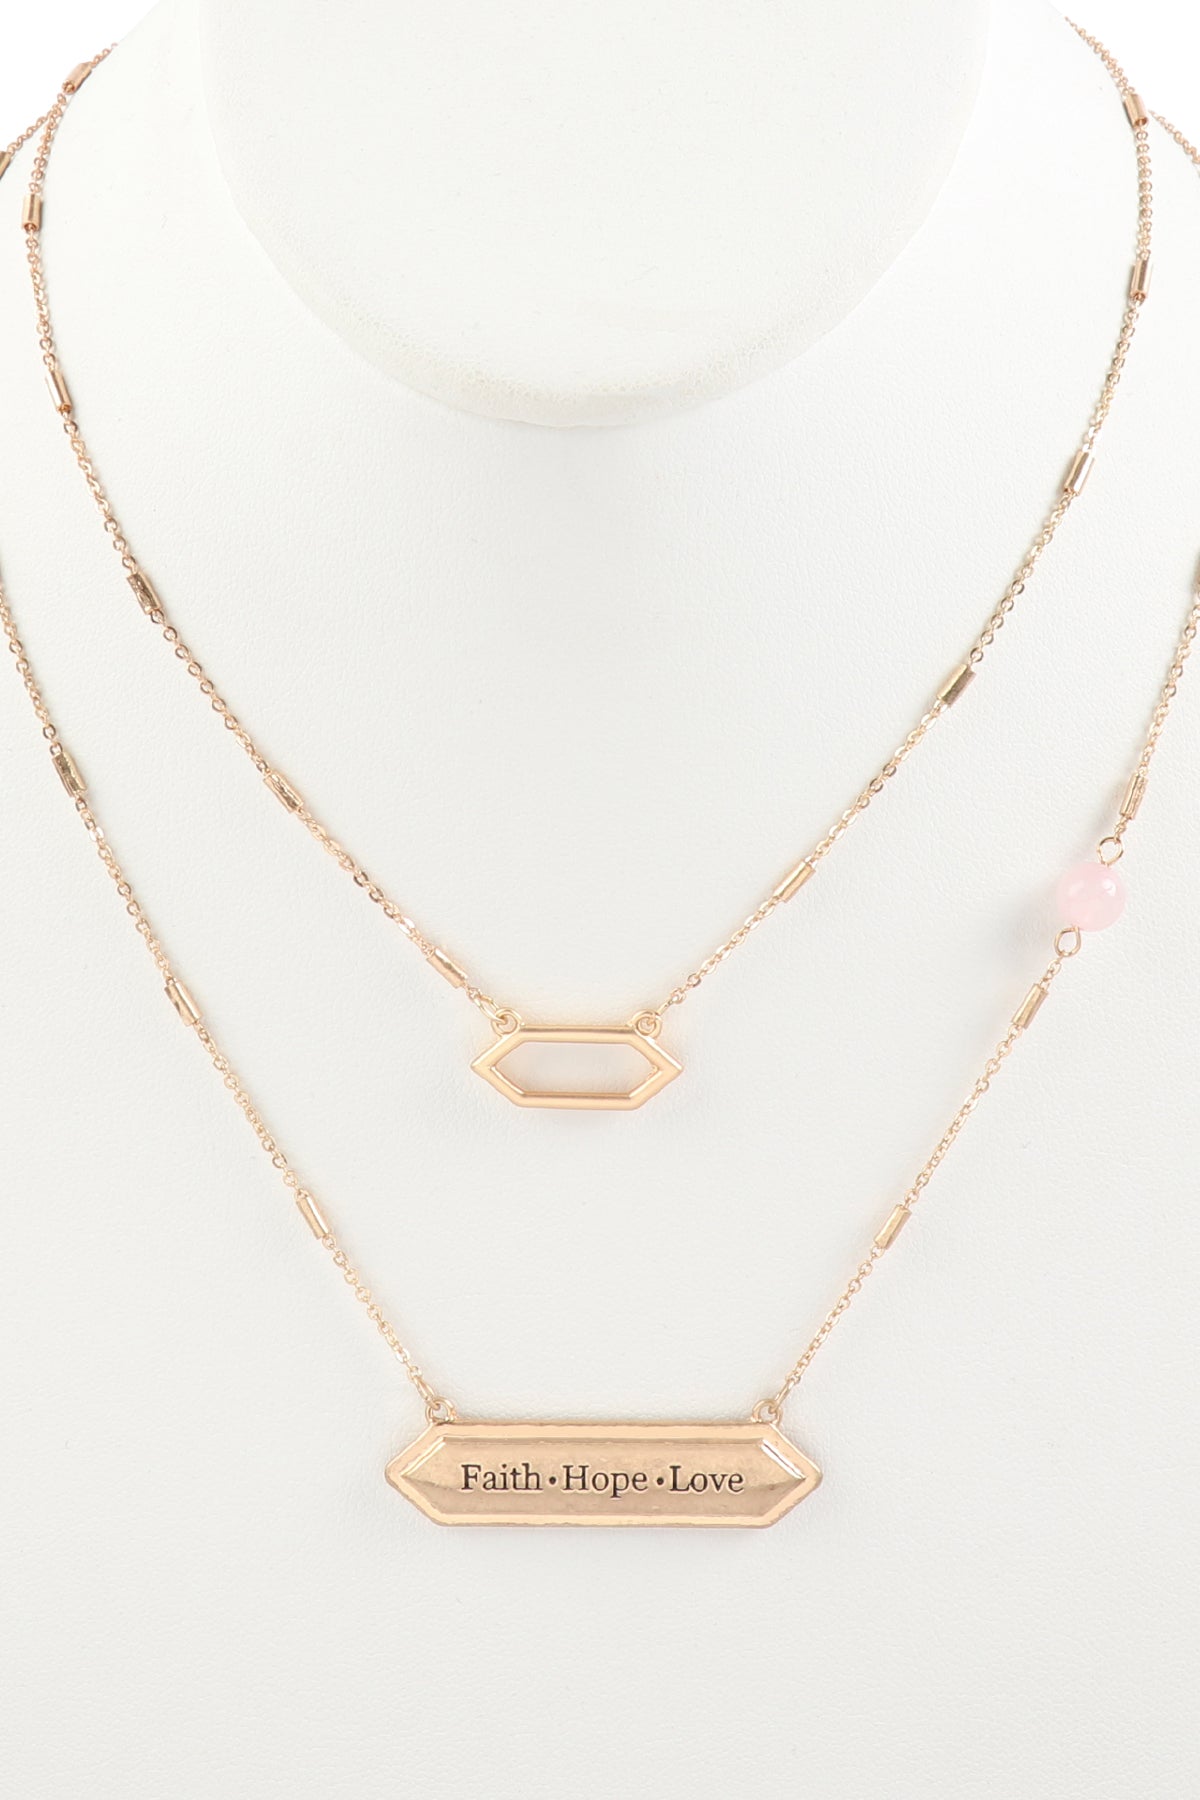 FAITH HOPE LOVE PENDANT NECKLACE (NOW $1.50 ONLY!)